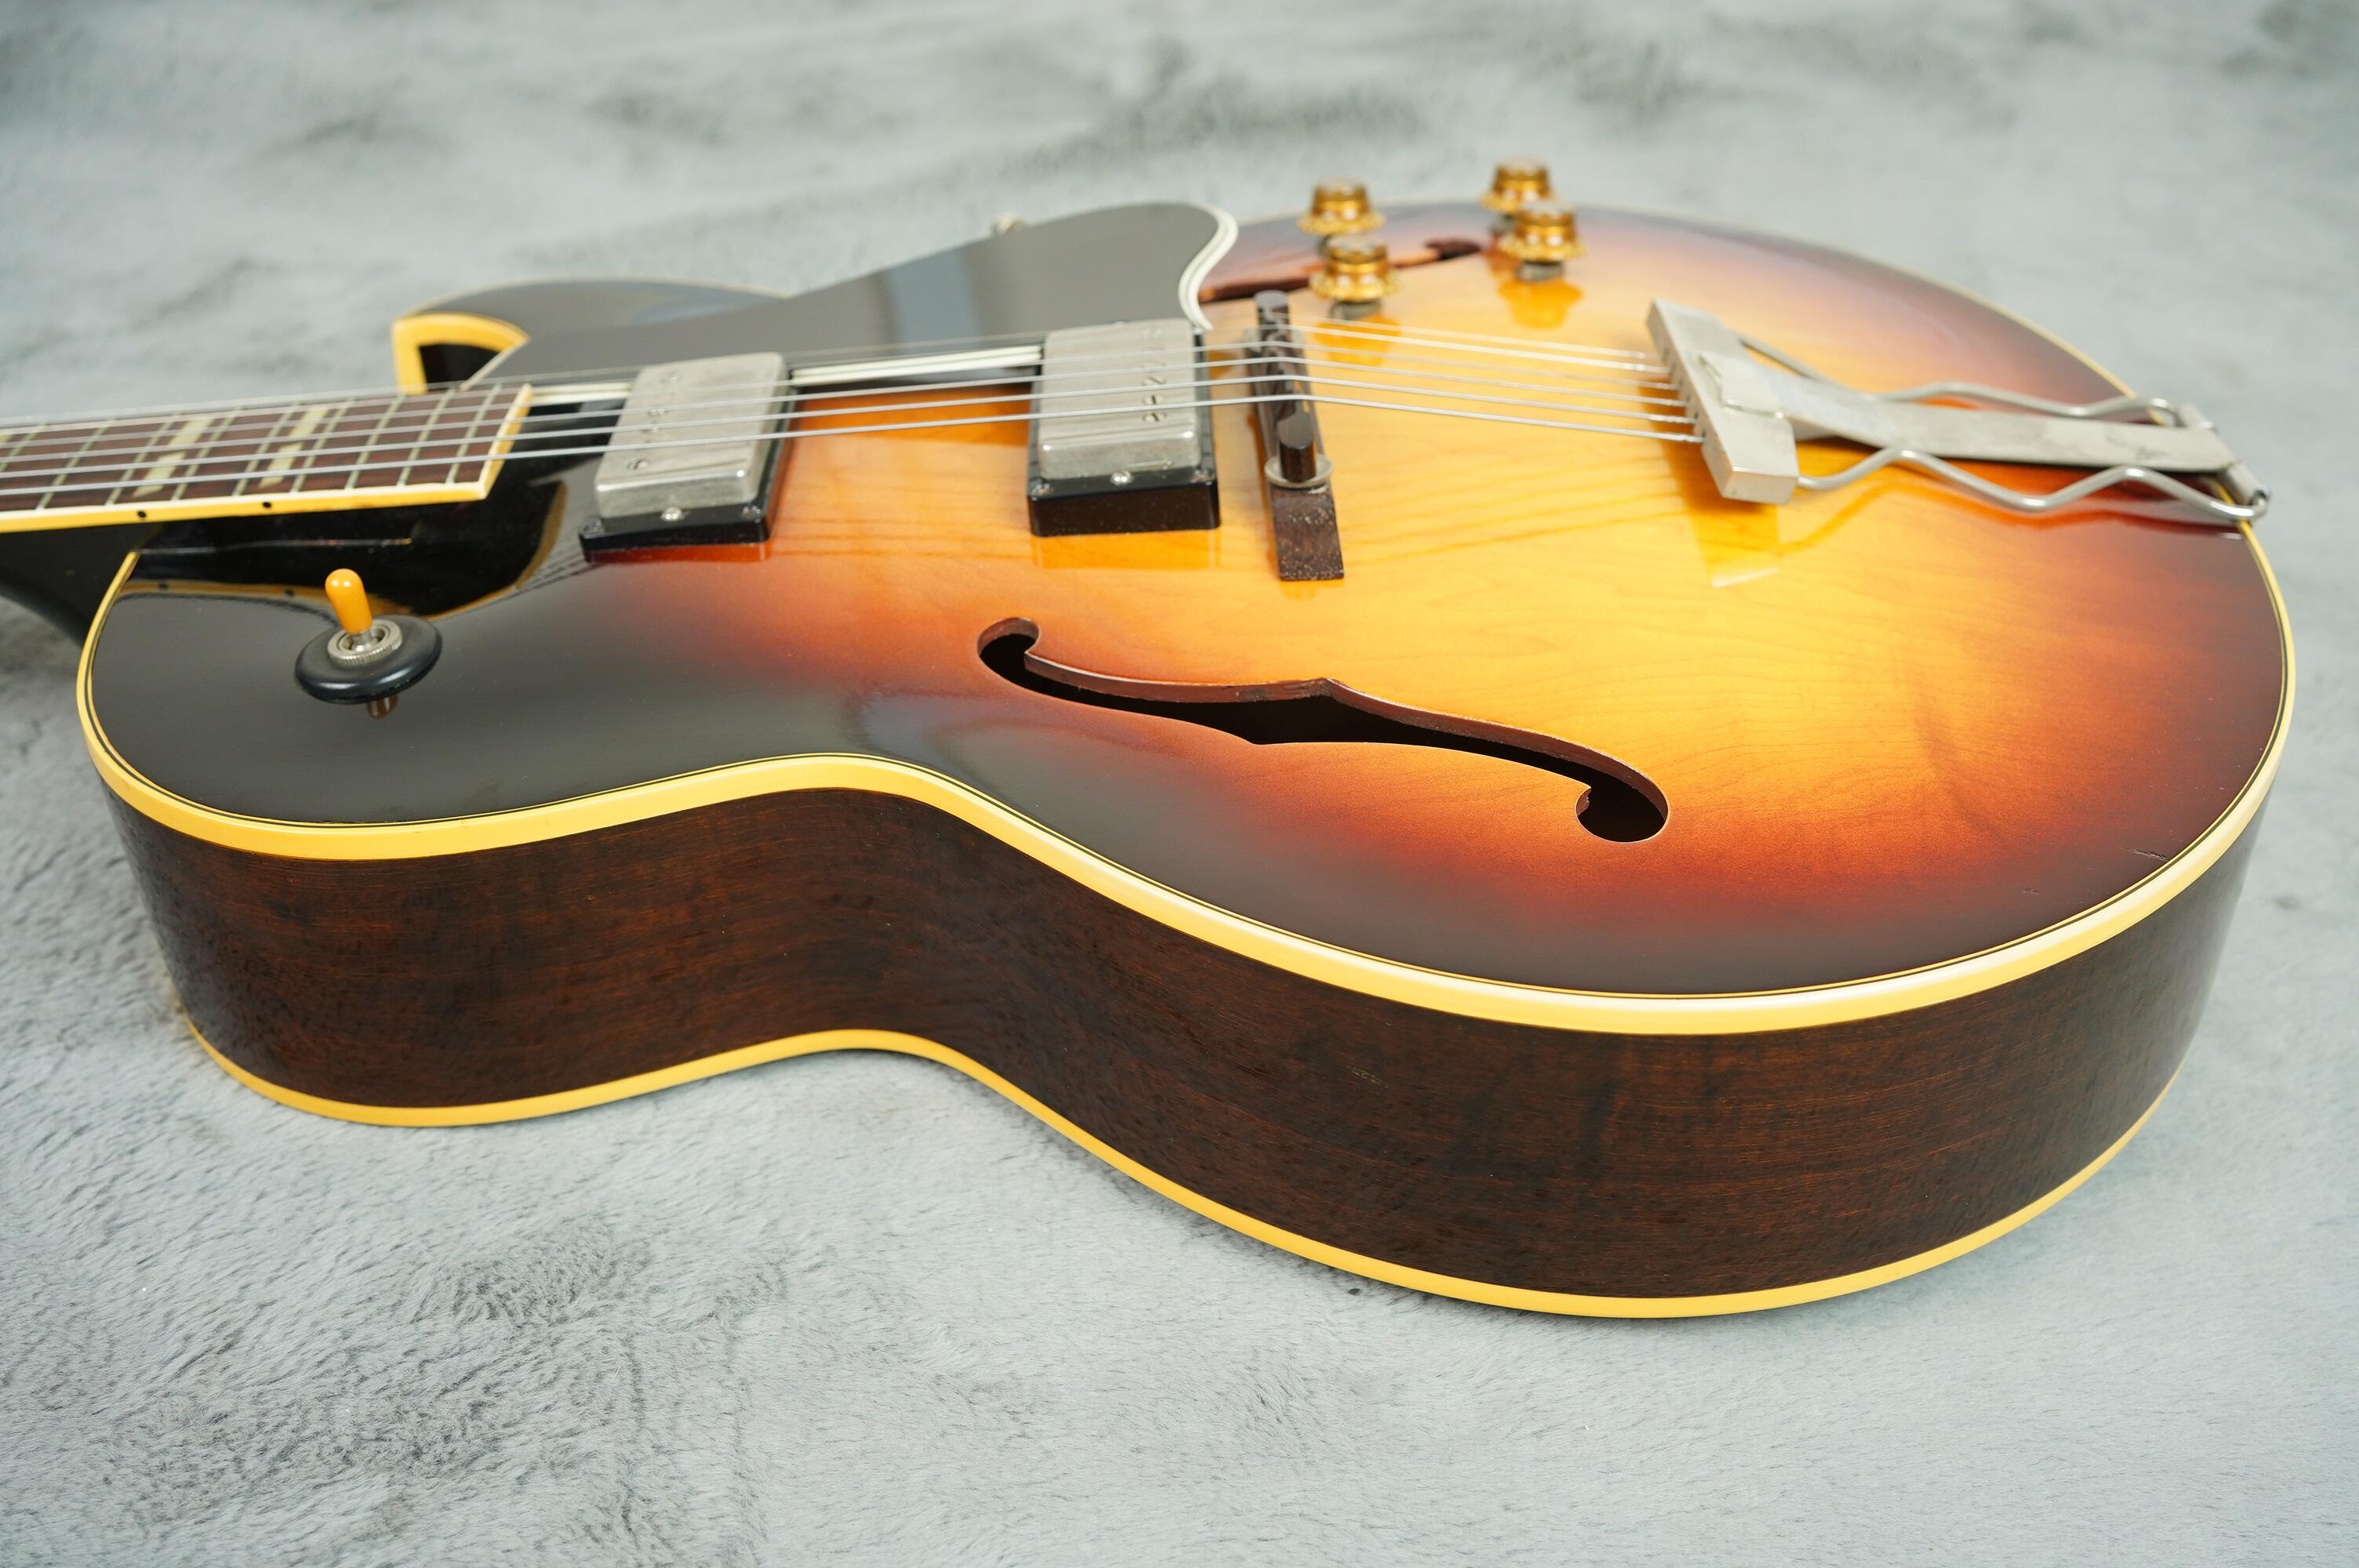 1959 Gibson ES-175D with Double White PAF's